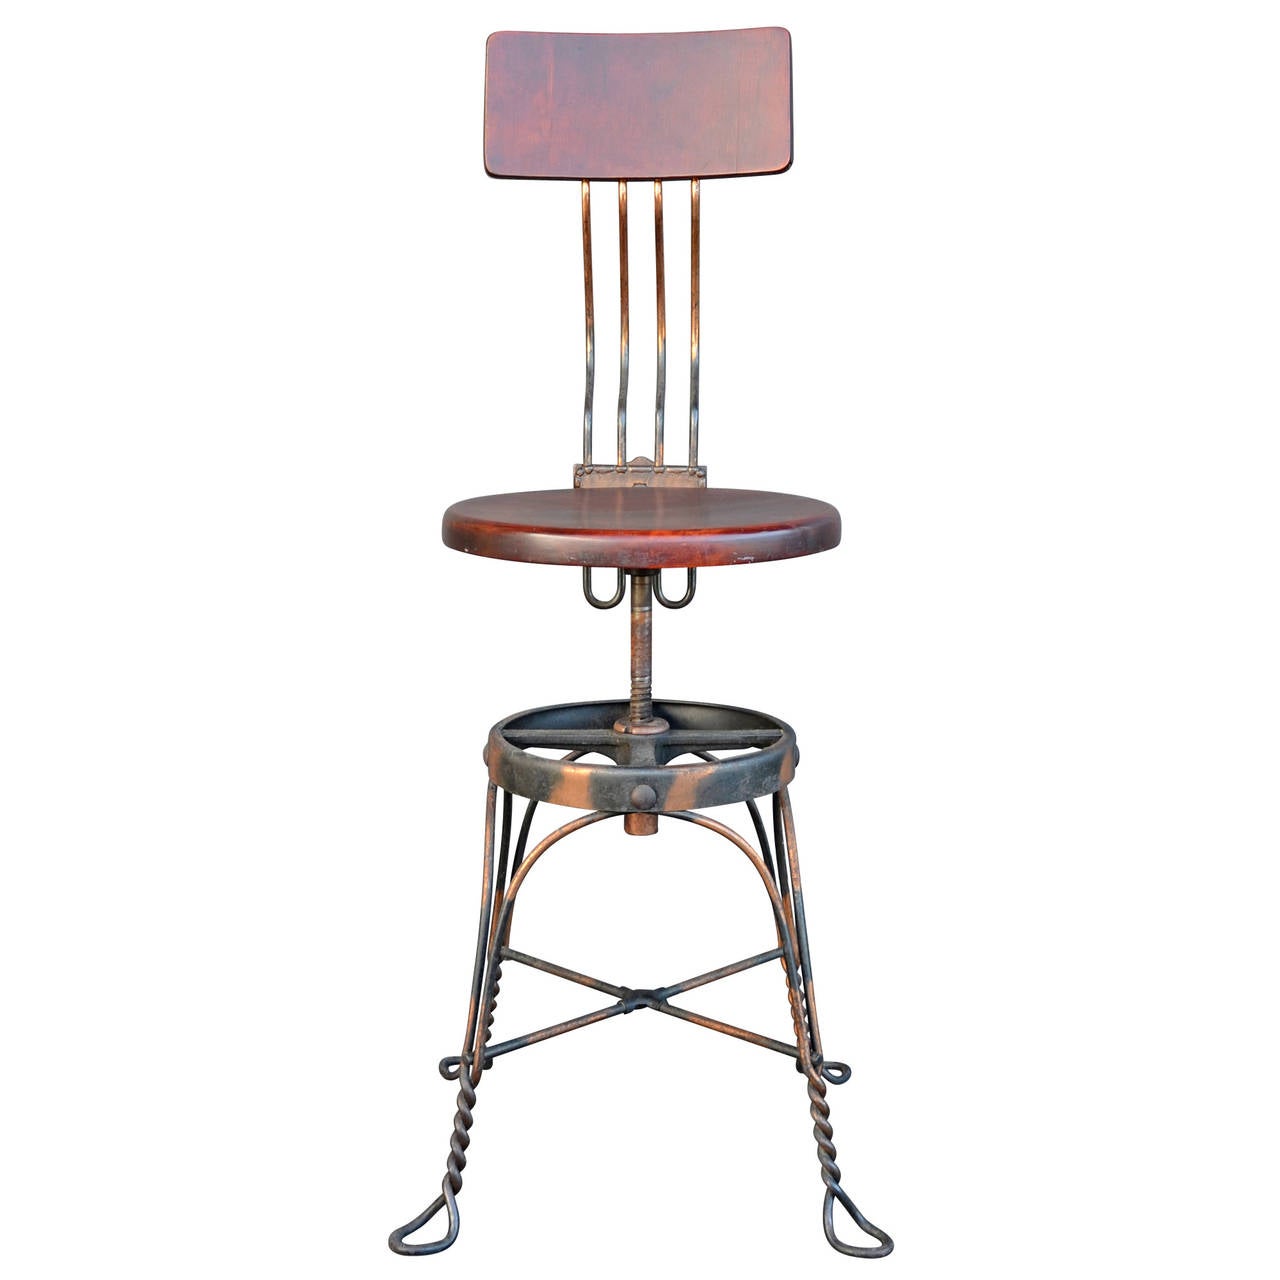 This Victorian-era desk chair comes with a twist (pun intended). The wrought iron base features some of the most wonderful japanned copper finish we've ever seen, which only serves to highlight the ornate casting and wire-work . We also love the